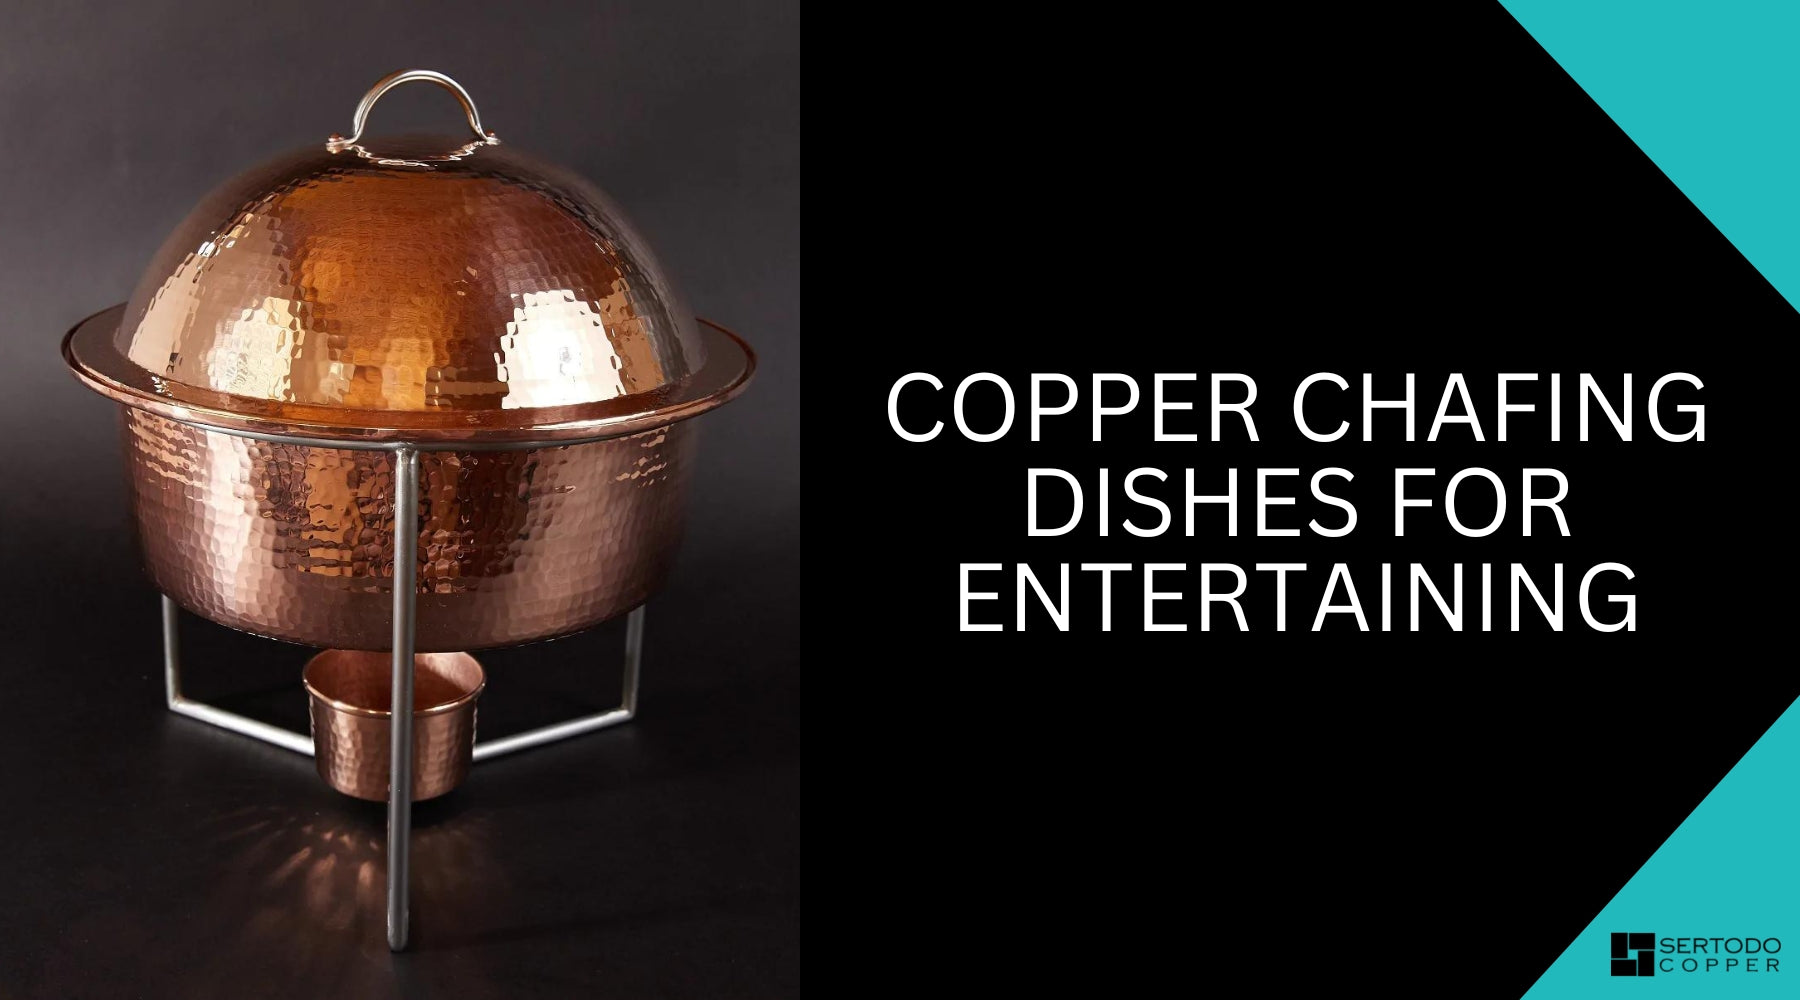 Copper Chafing Dishes for Entertaining